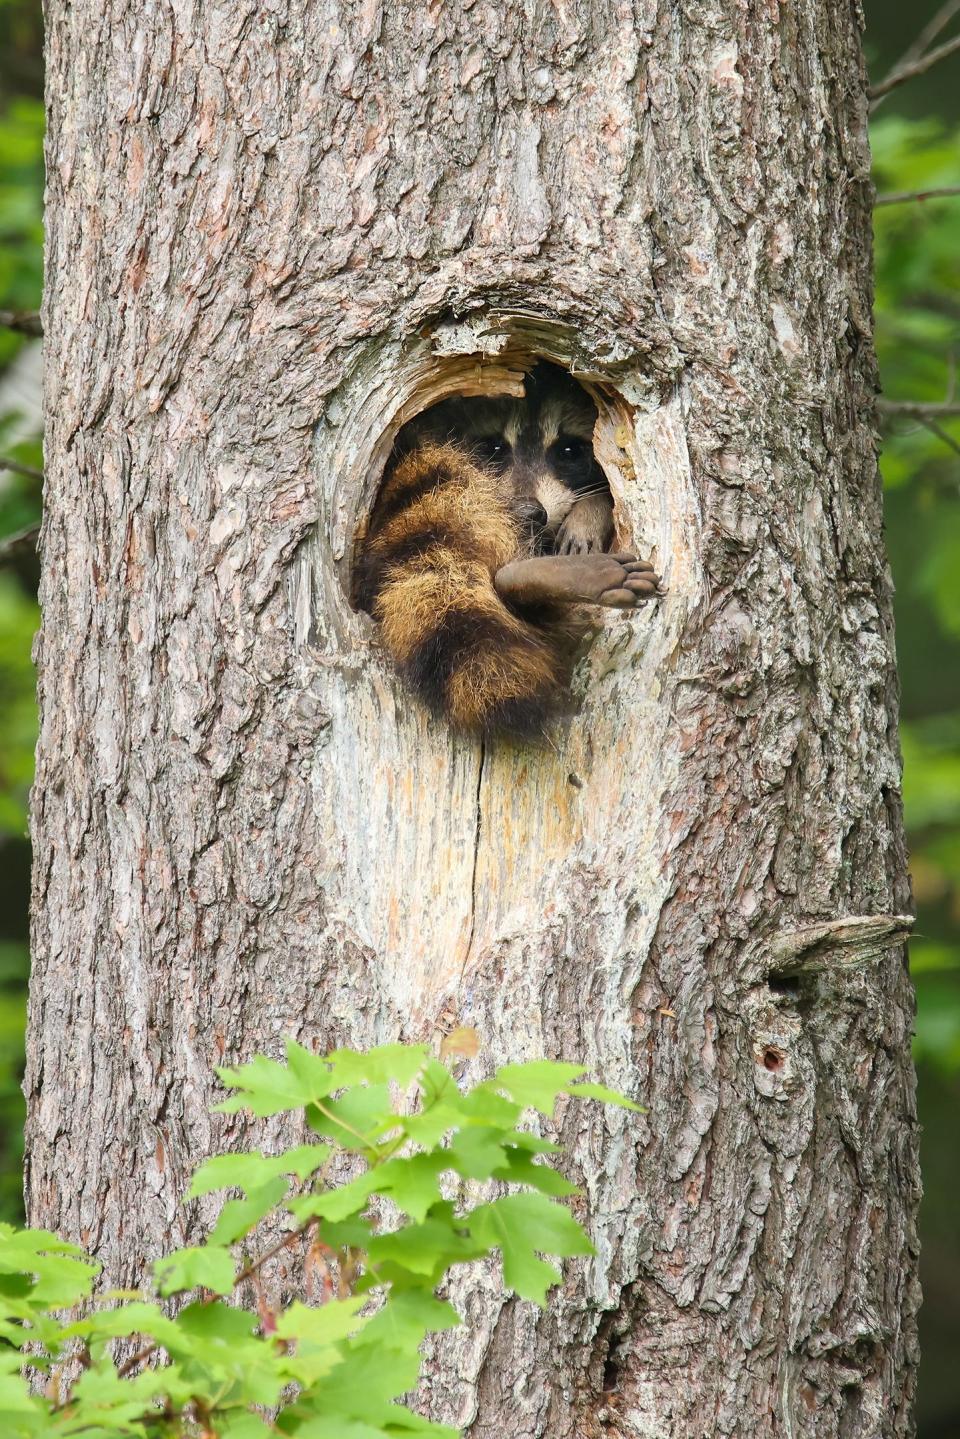 A raccoon stuck in a hole in a tree trunk.